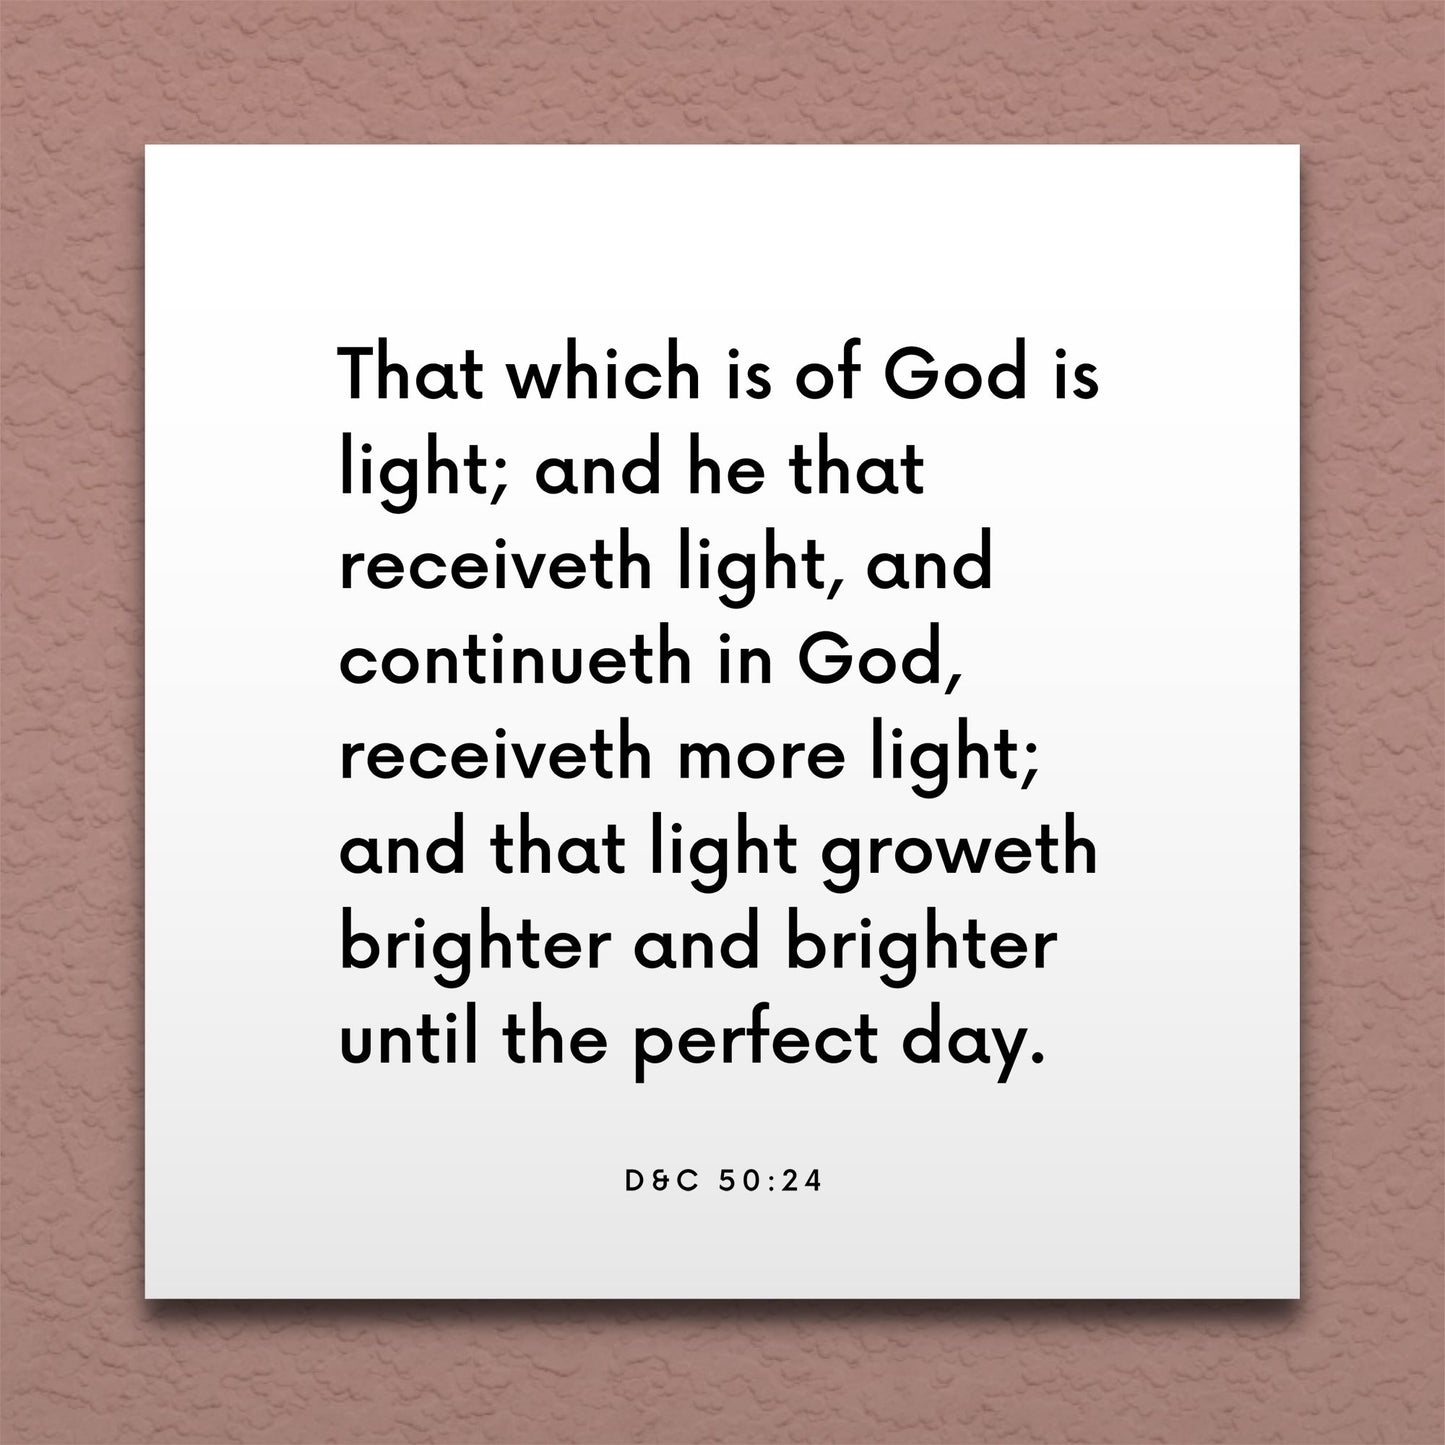 Wall-mounted scripture tile for D&C 50:24 - "That which is of God is light"